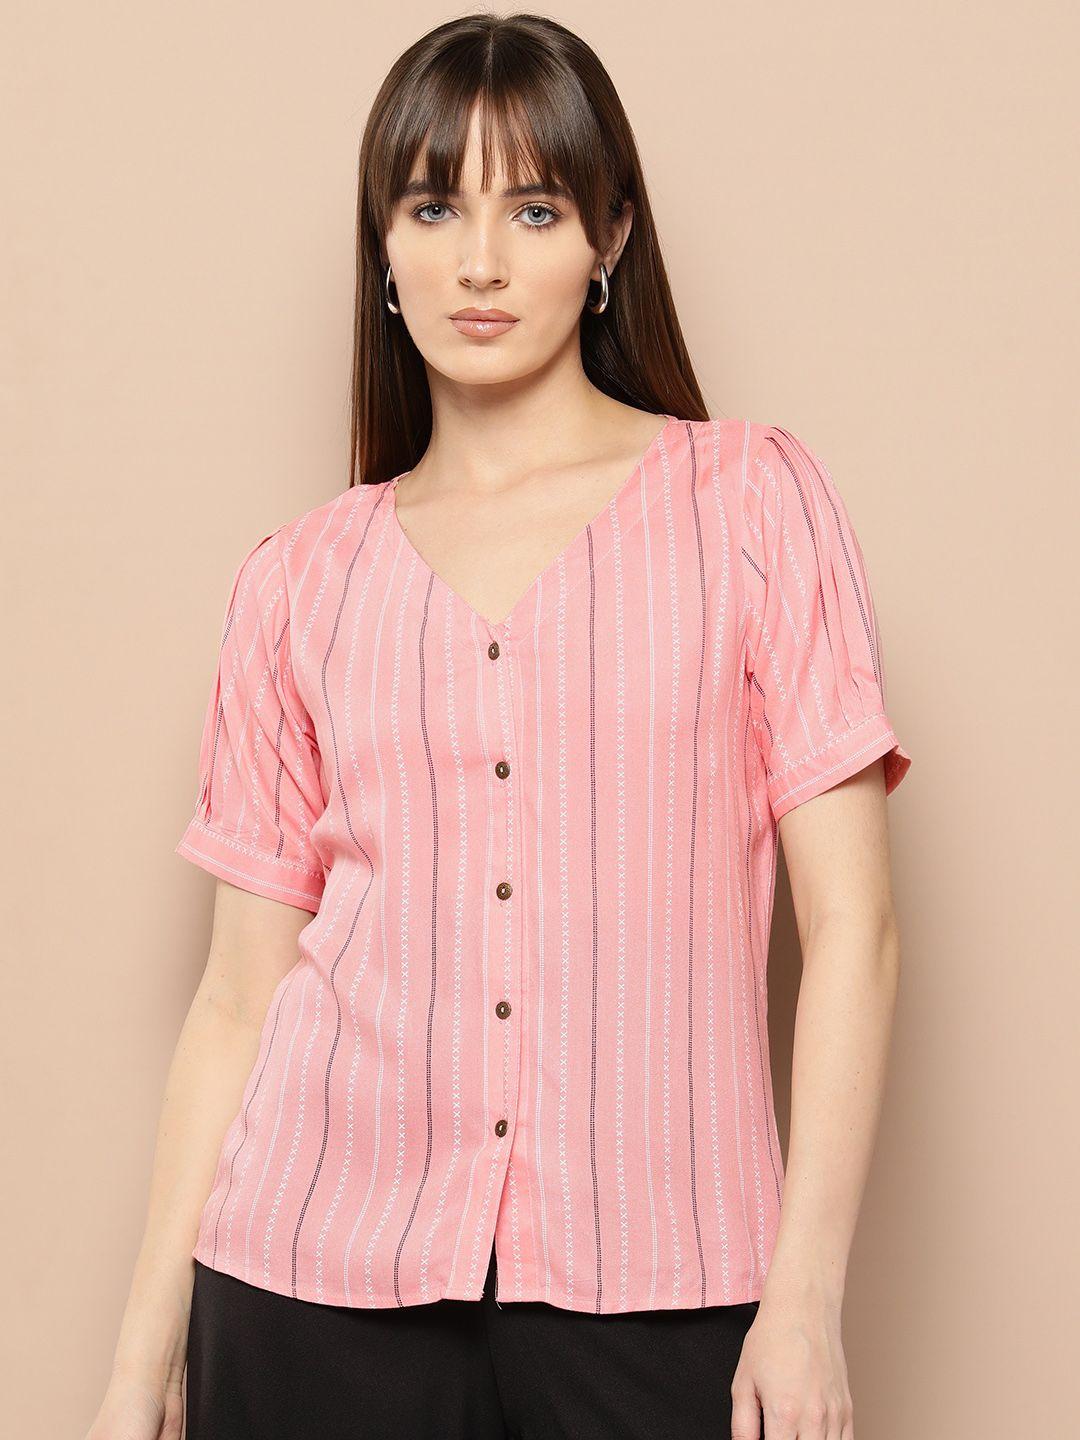 chemistry-striped-shirt-style-top